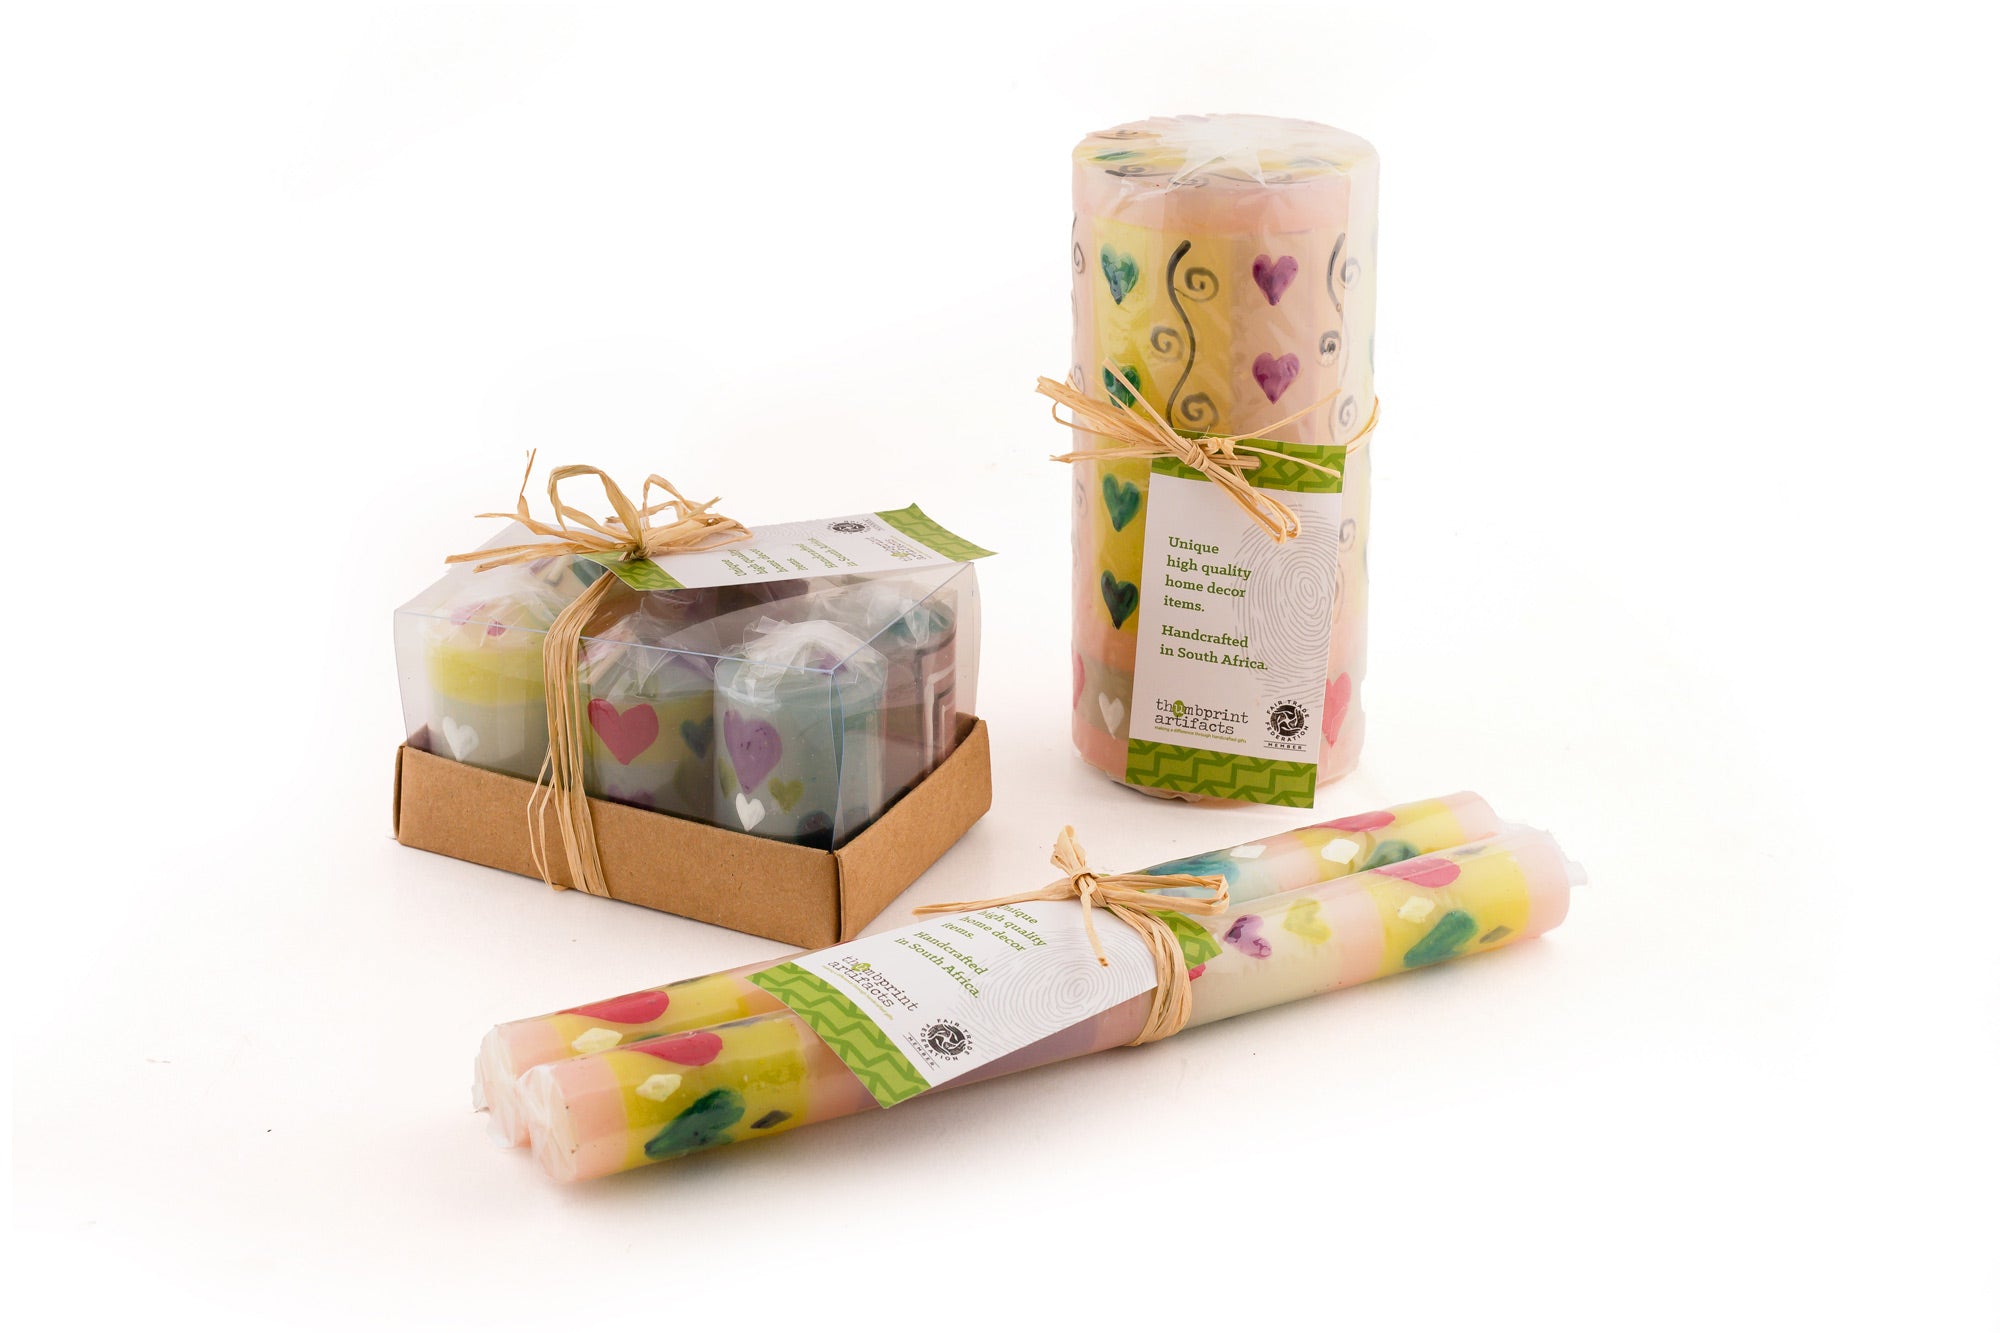 Packaging presentation of the various candles; votive 6-pack, 3x6 pillar and taper pair. Each candle is individually wrapped and come with a story card.